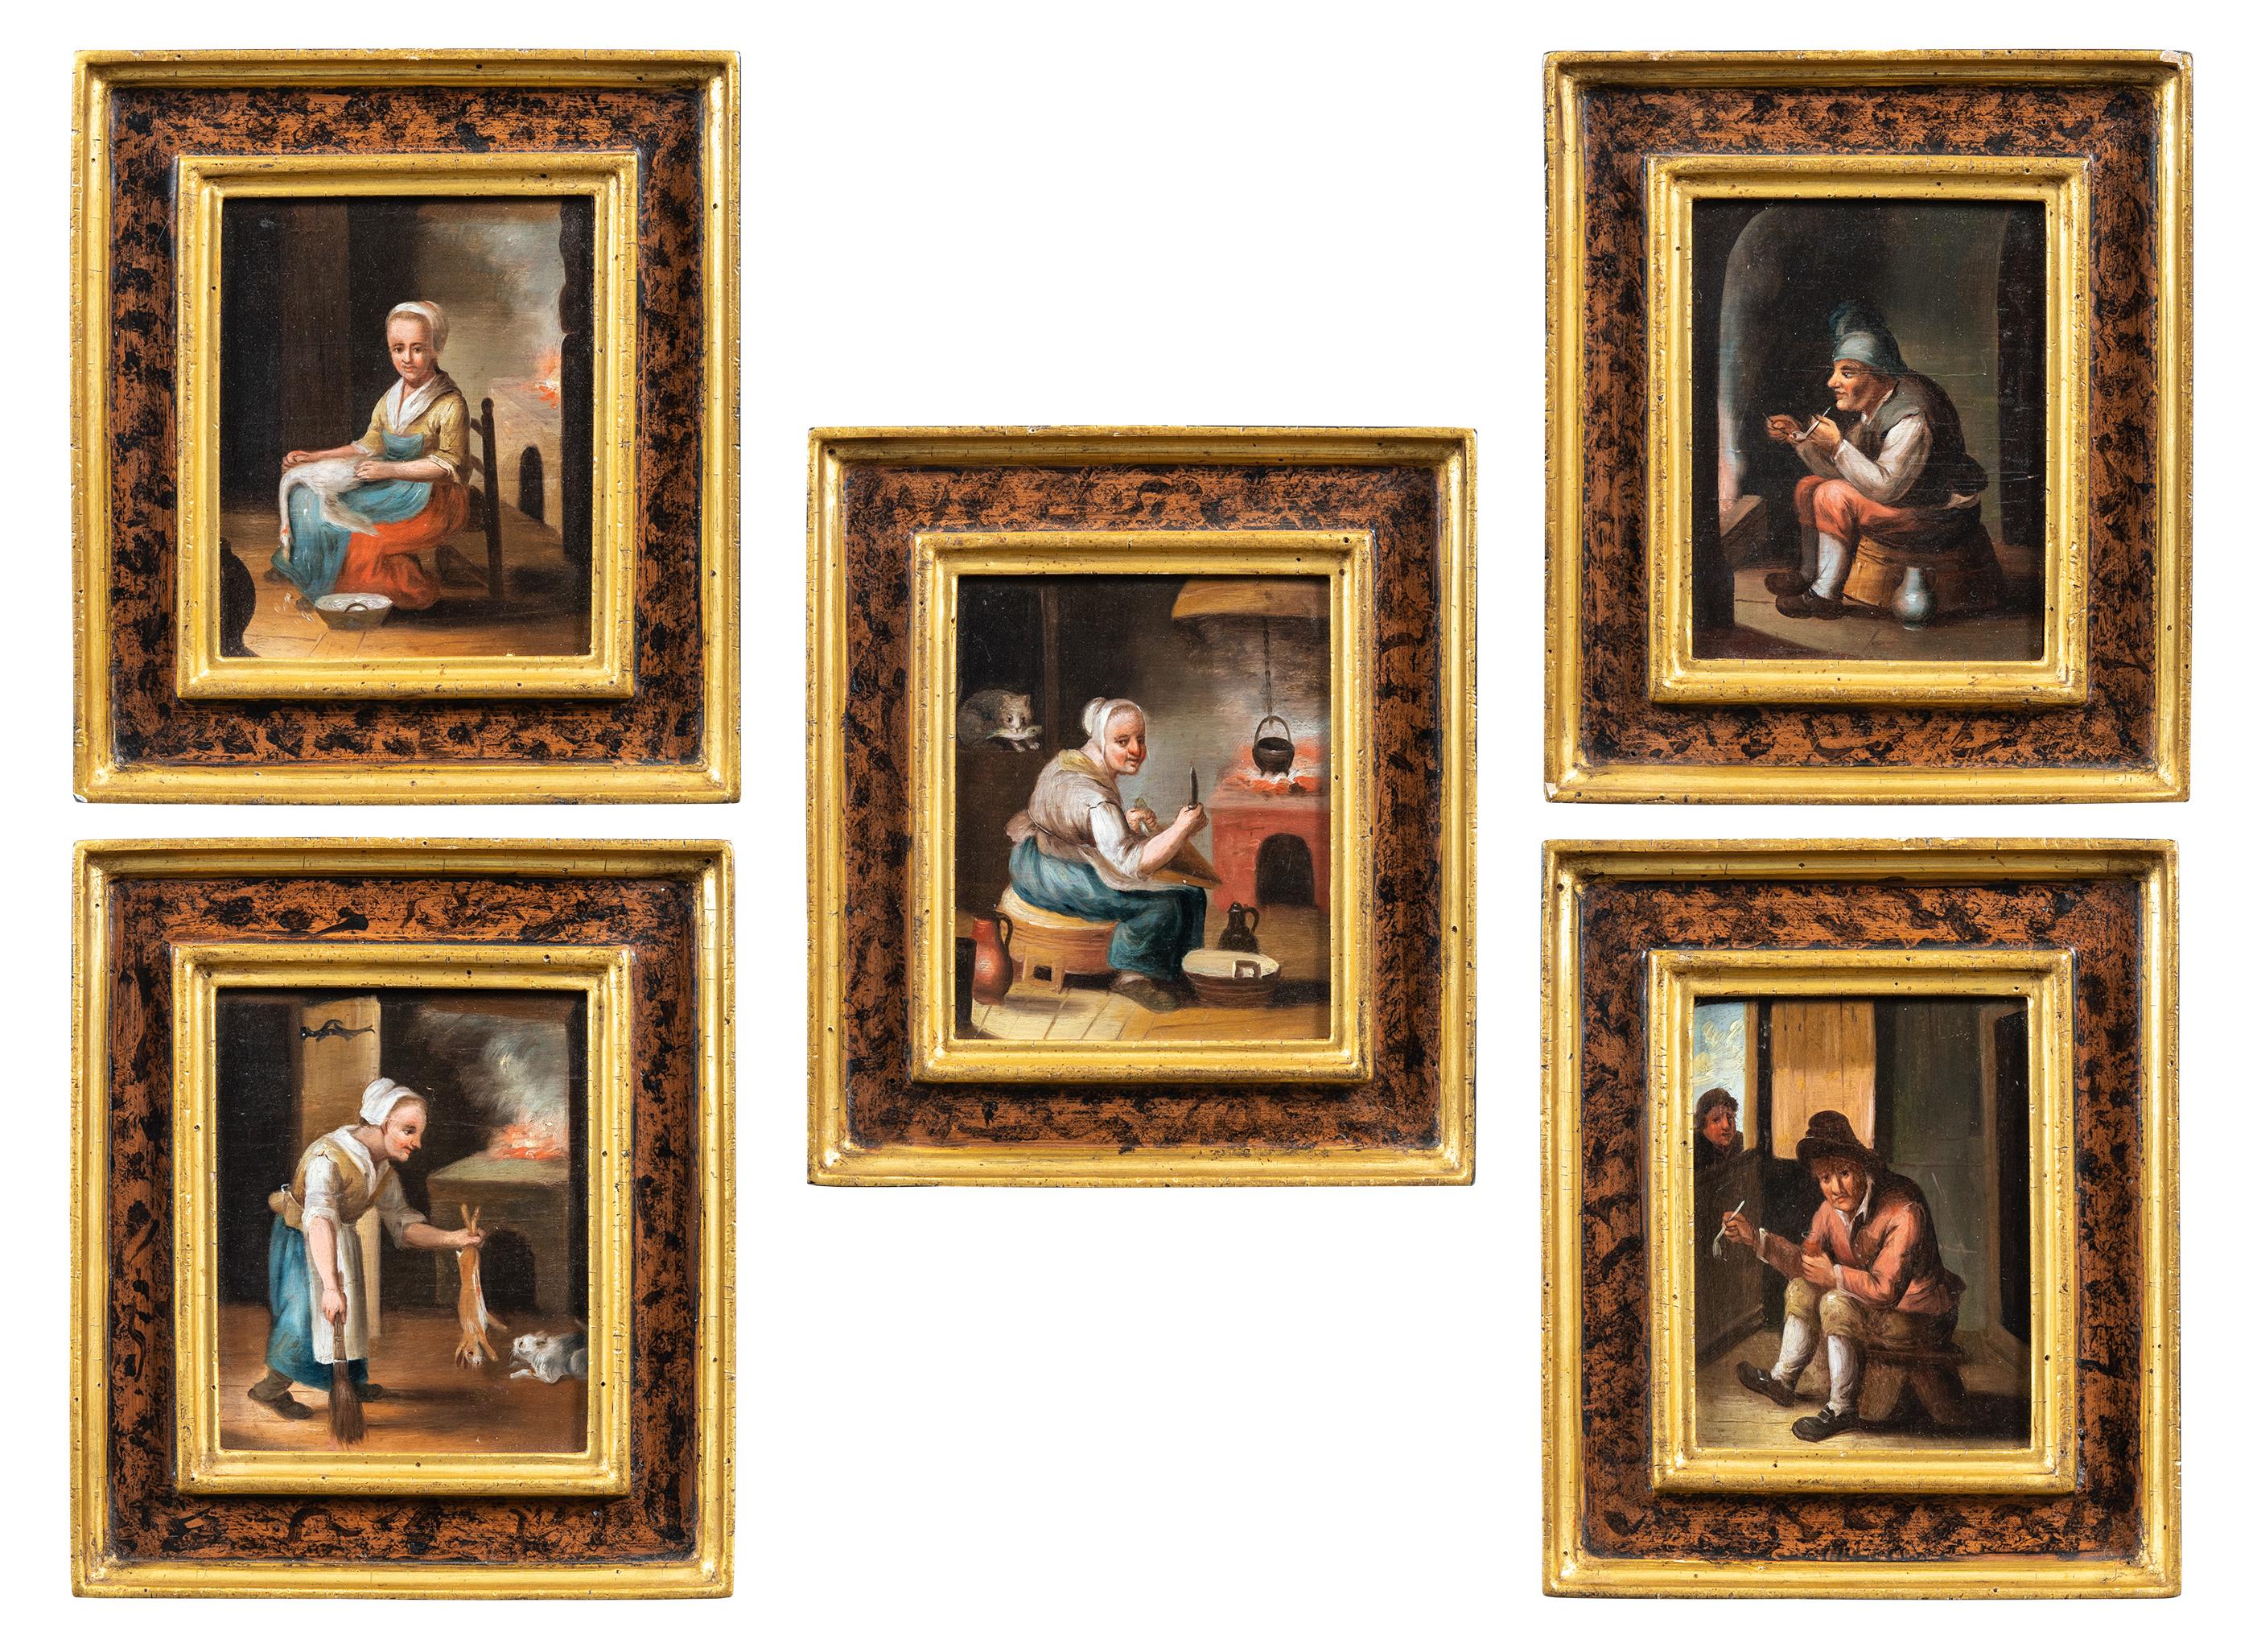 Unknown Portrait Painting - Set of Five 18th century Dutch figure paintings - Interiors scenes - Signed